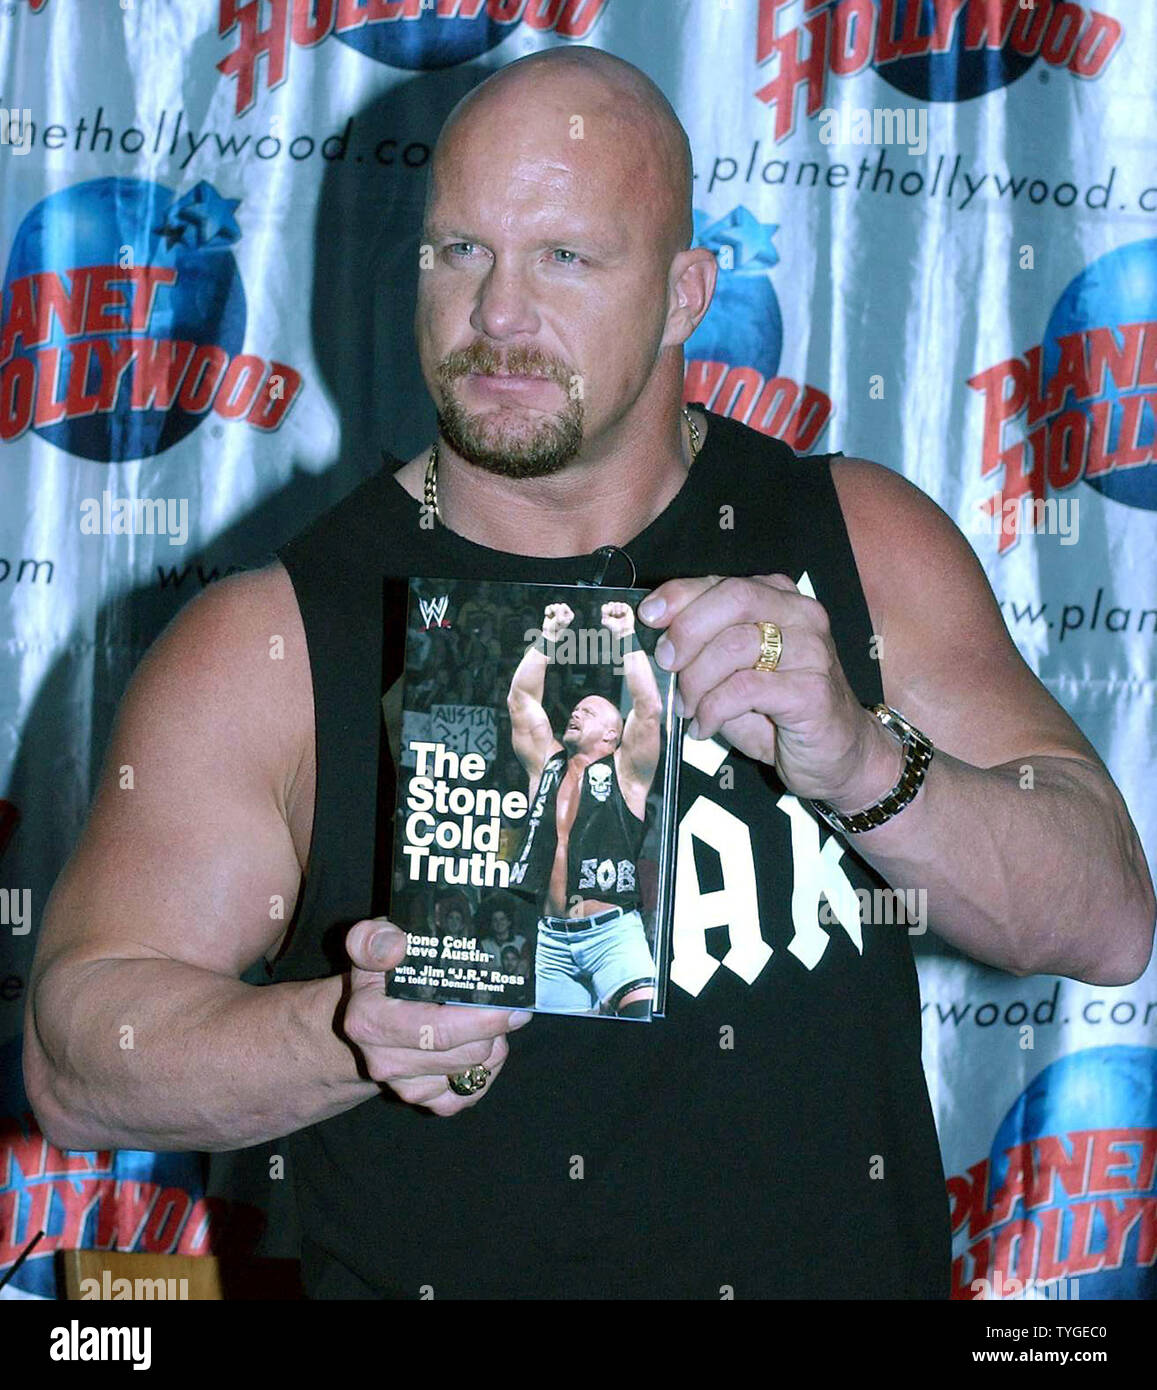 World Wrestling Federation star Stone Cold Steve Austin poses for the media on October 30, 2003 at New York's Planet Hollywood for the launch of his autobiography 'The Stone Cold Truth.'  (UPI/Ezio Petersen) Stock Photo